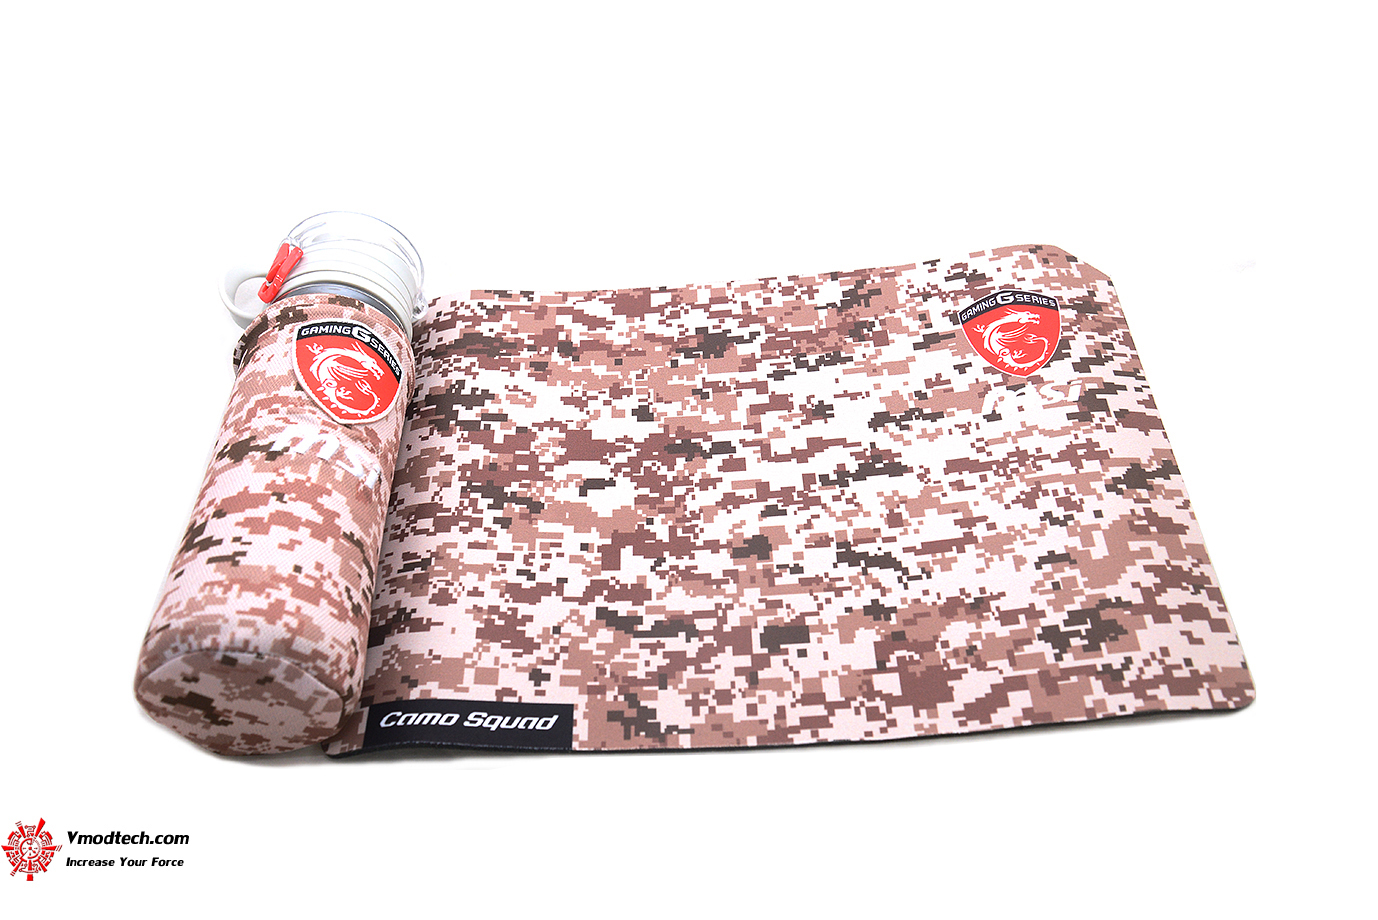 dsc 13092 MSI GE62 7RE Camo Squad Limited Edition Review